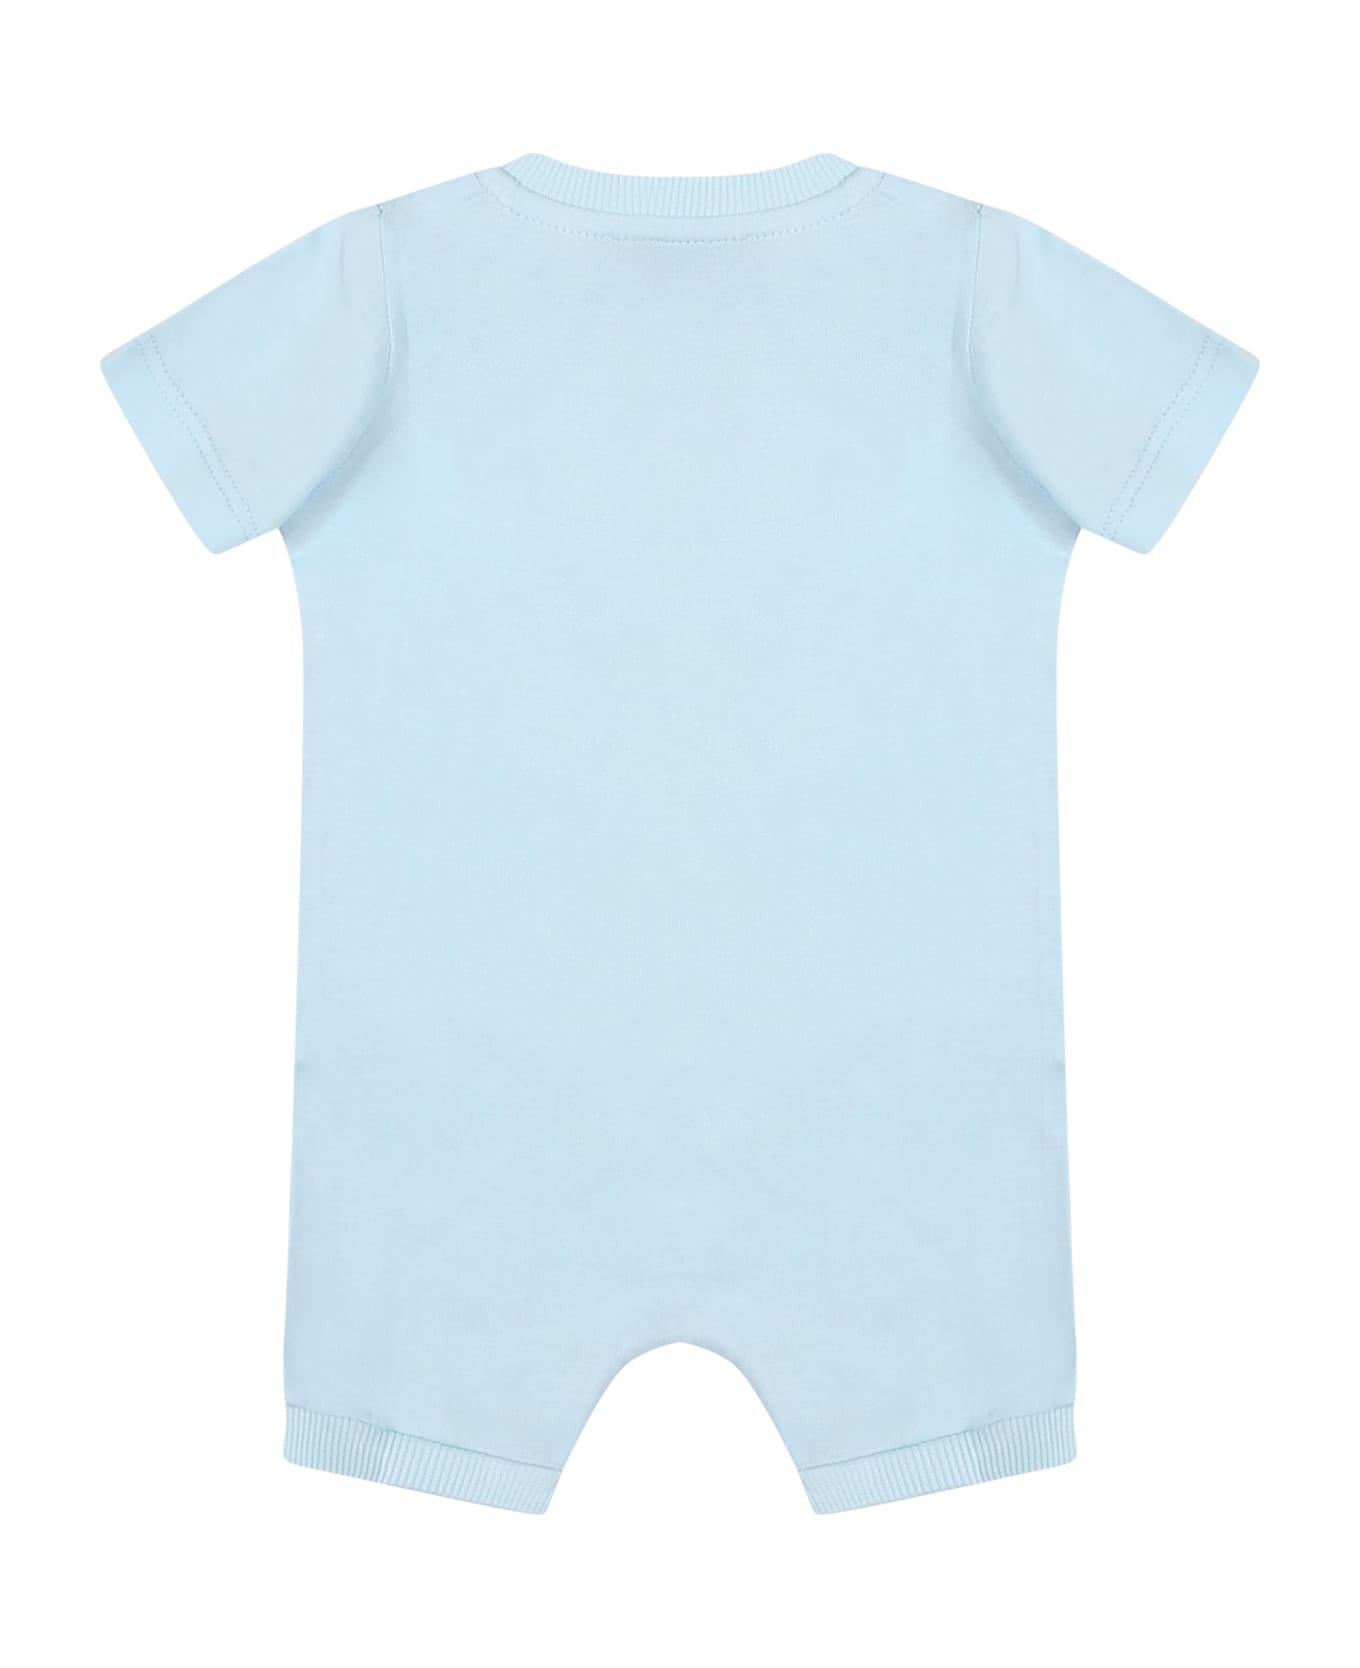 Moschino Light Blue Bodysuit For Baby Boy With Teddy Bear And Pinwheel - Light Blue ボディスーツ＆セットアップ